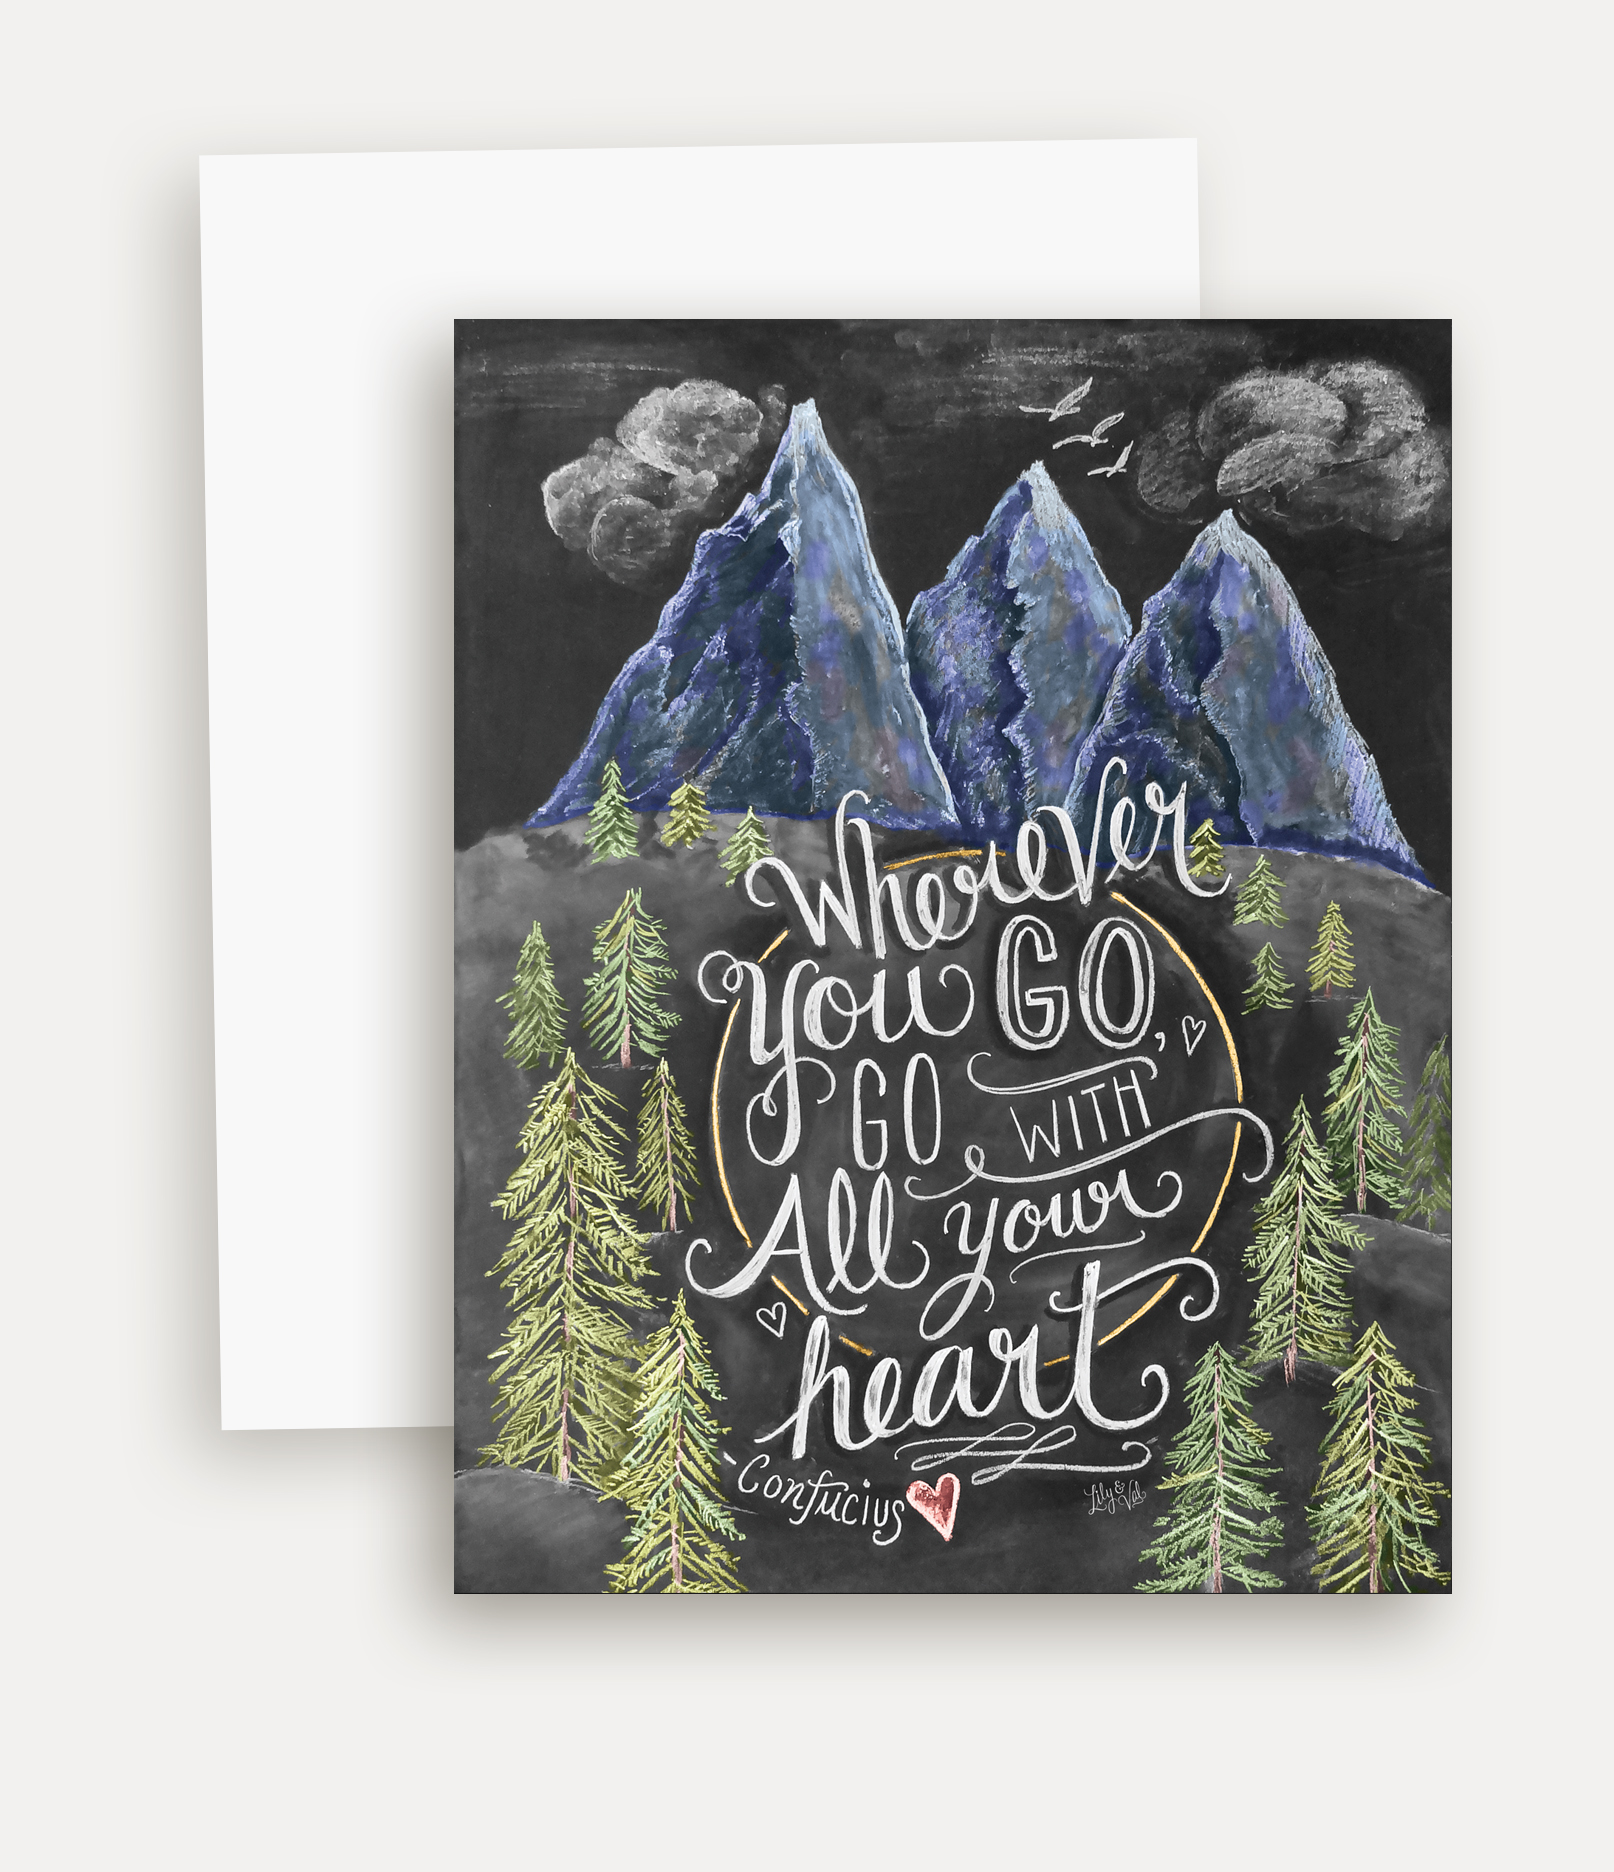 The perfect card to send to a friend who loves traveling